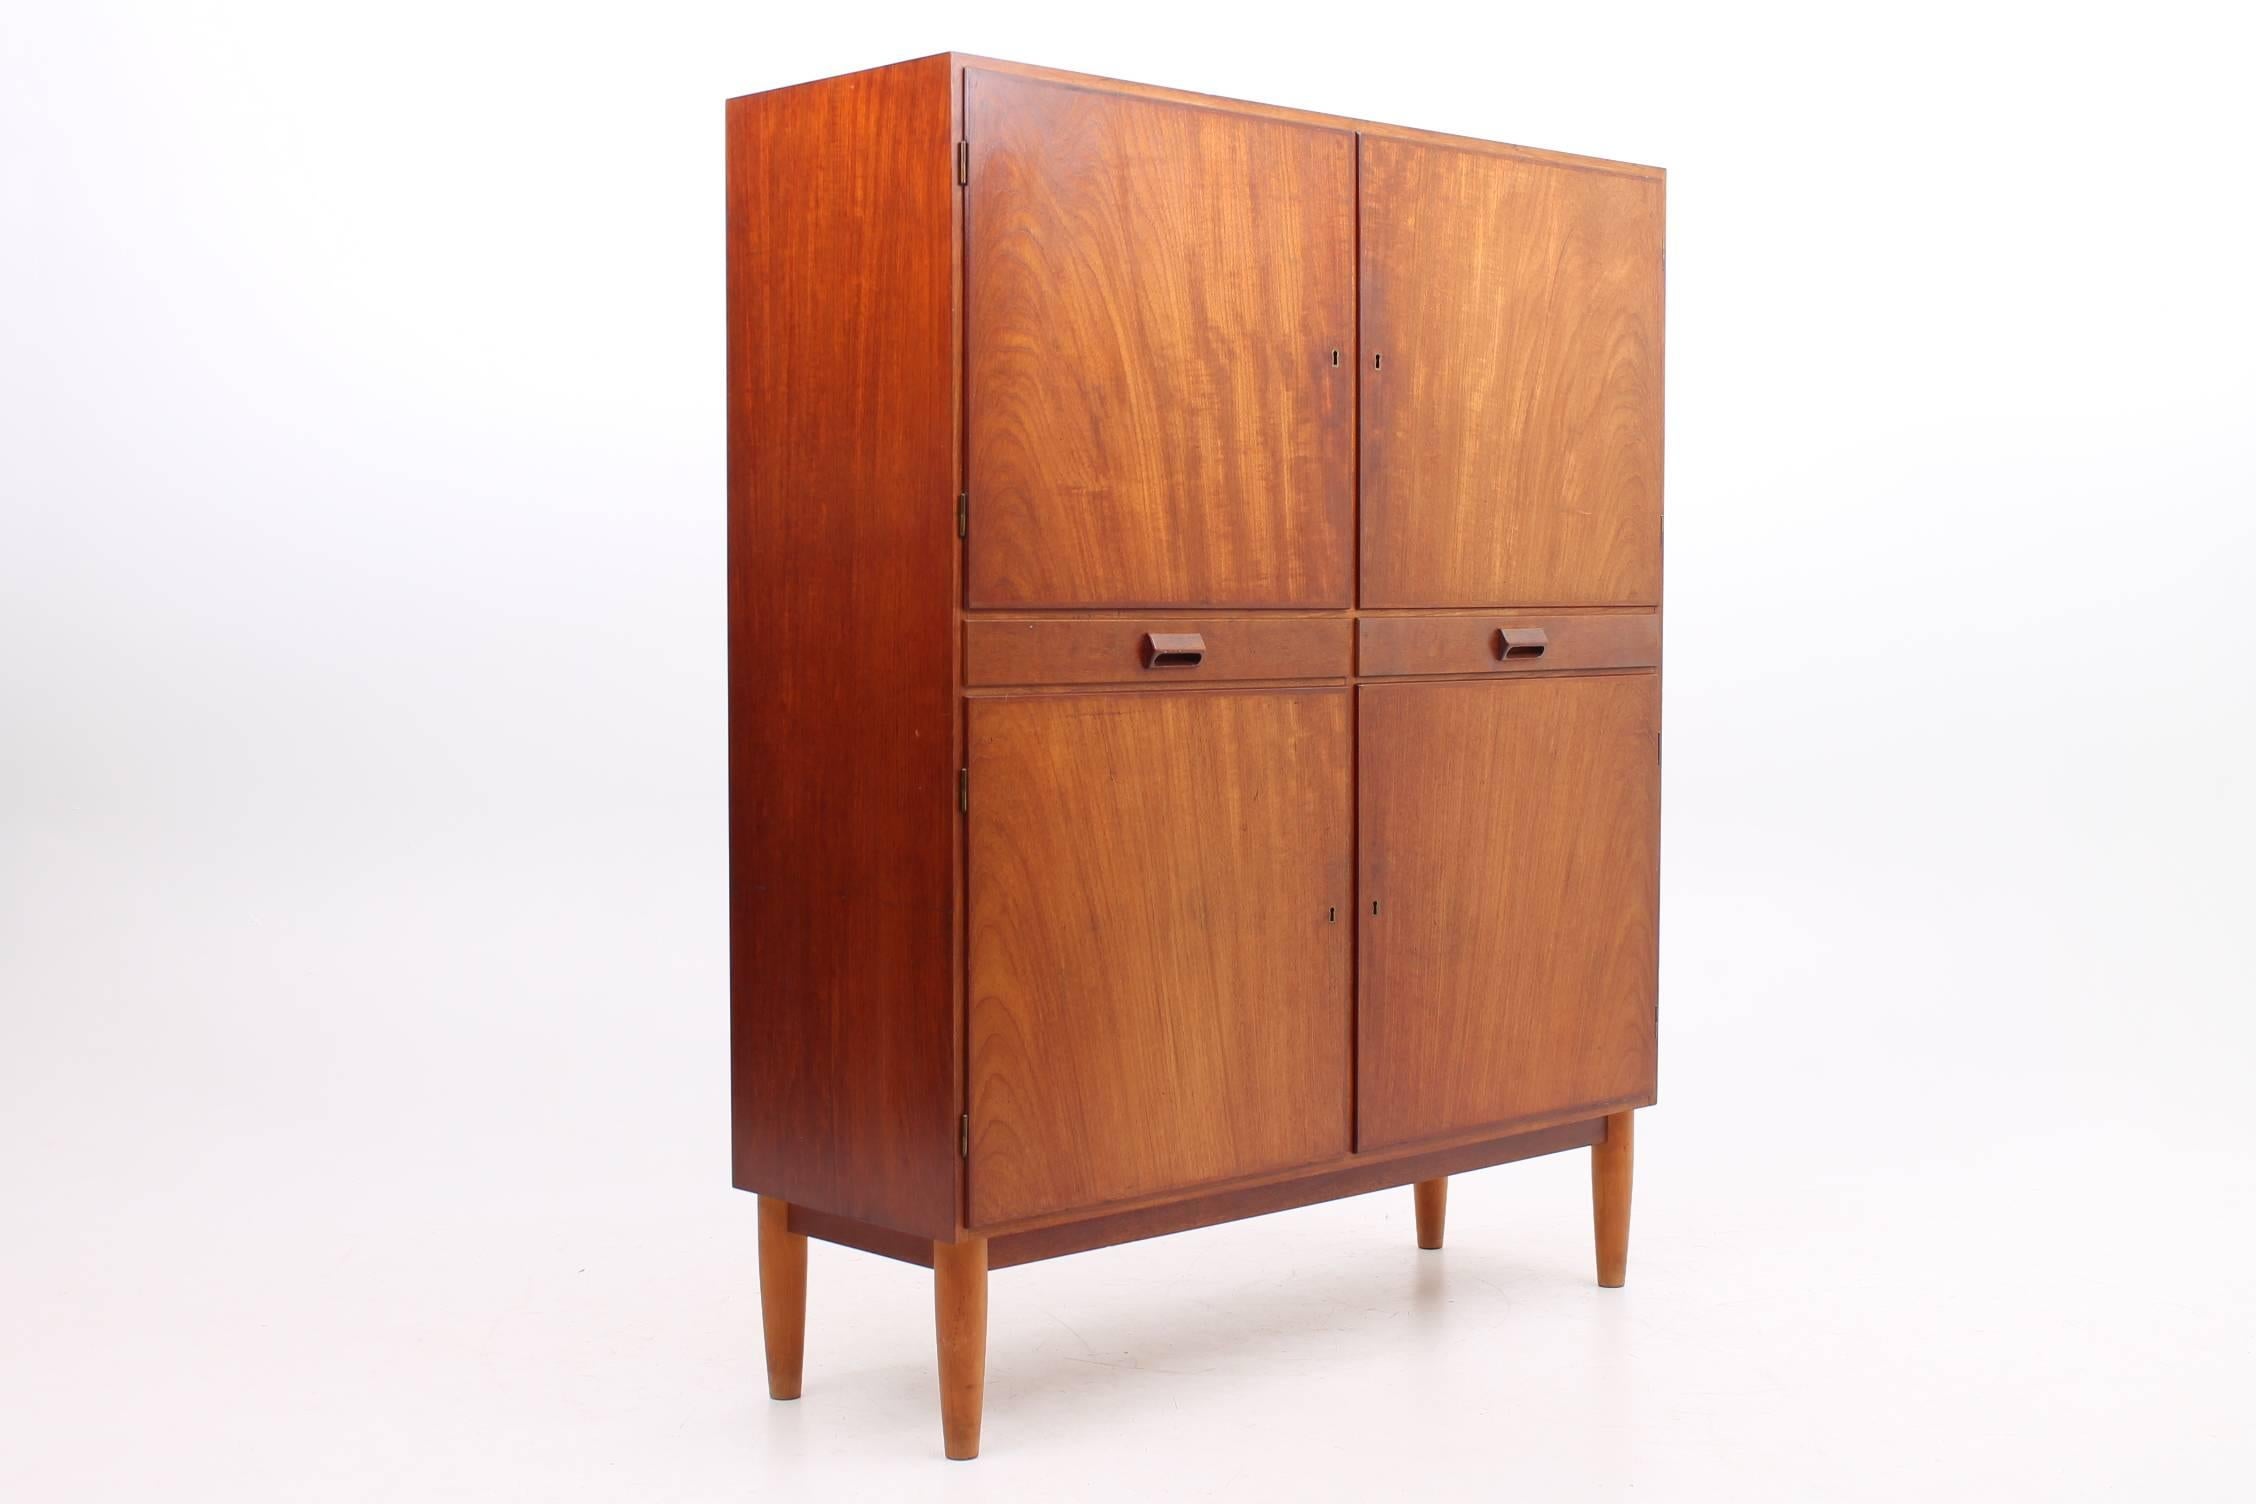 Beautiful cabinet designed by Børge Mogensen made of solid teak. This cabinet features four locking sections with adjustable shelves separated by two slim drawers. This cabinet is very versatile and would work great in any room of the house -